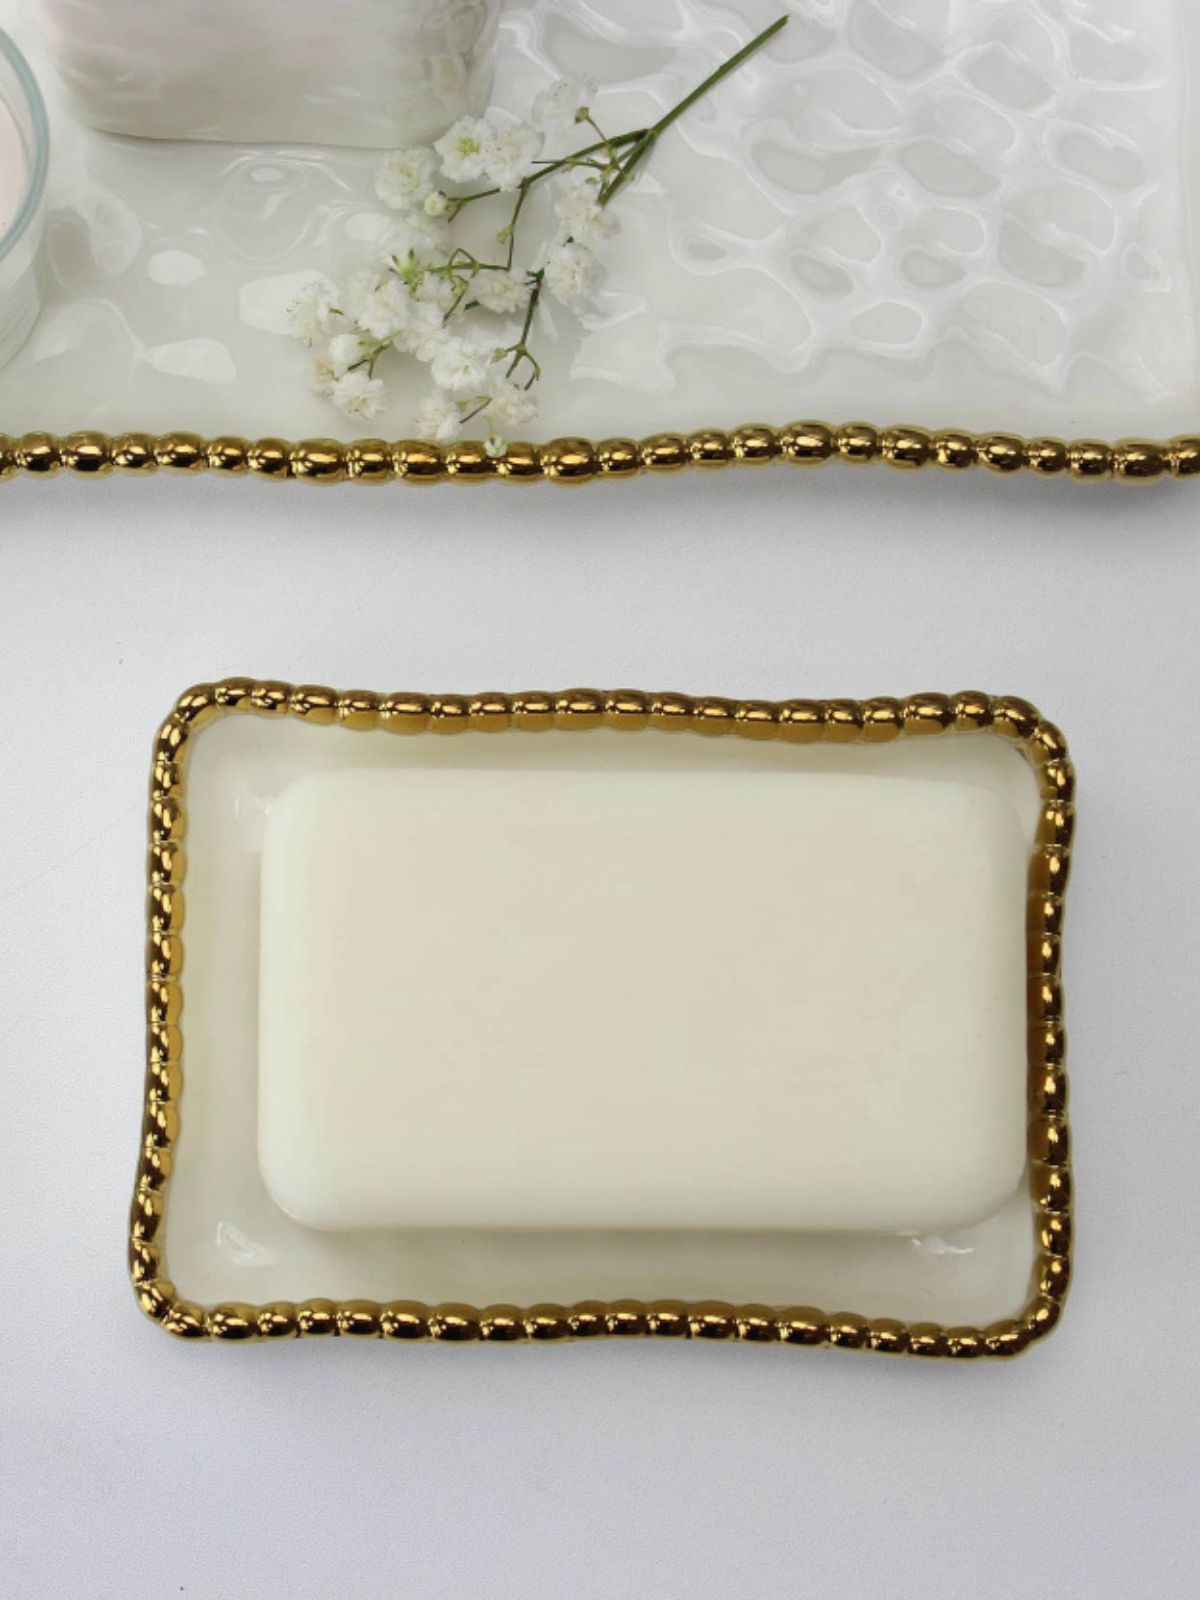 White Porcelain Soap Dish with Gold Beaded Edges.